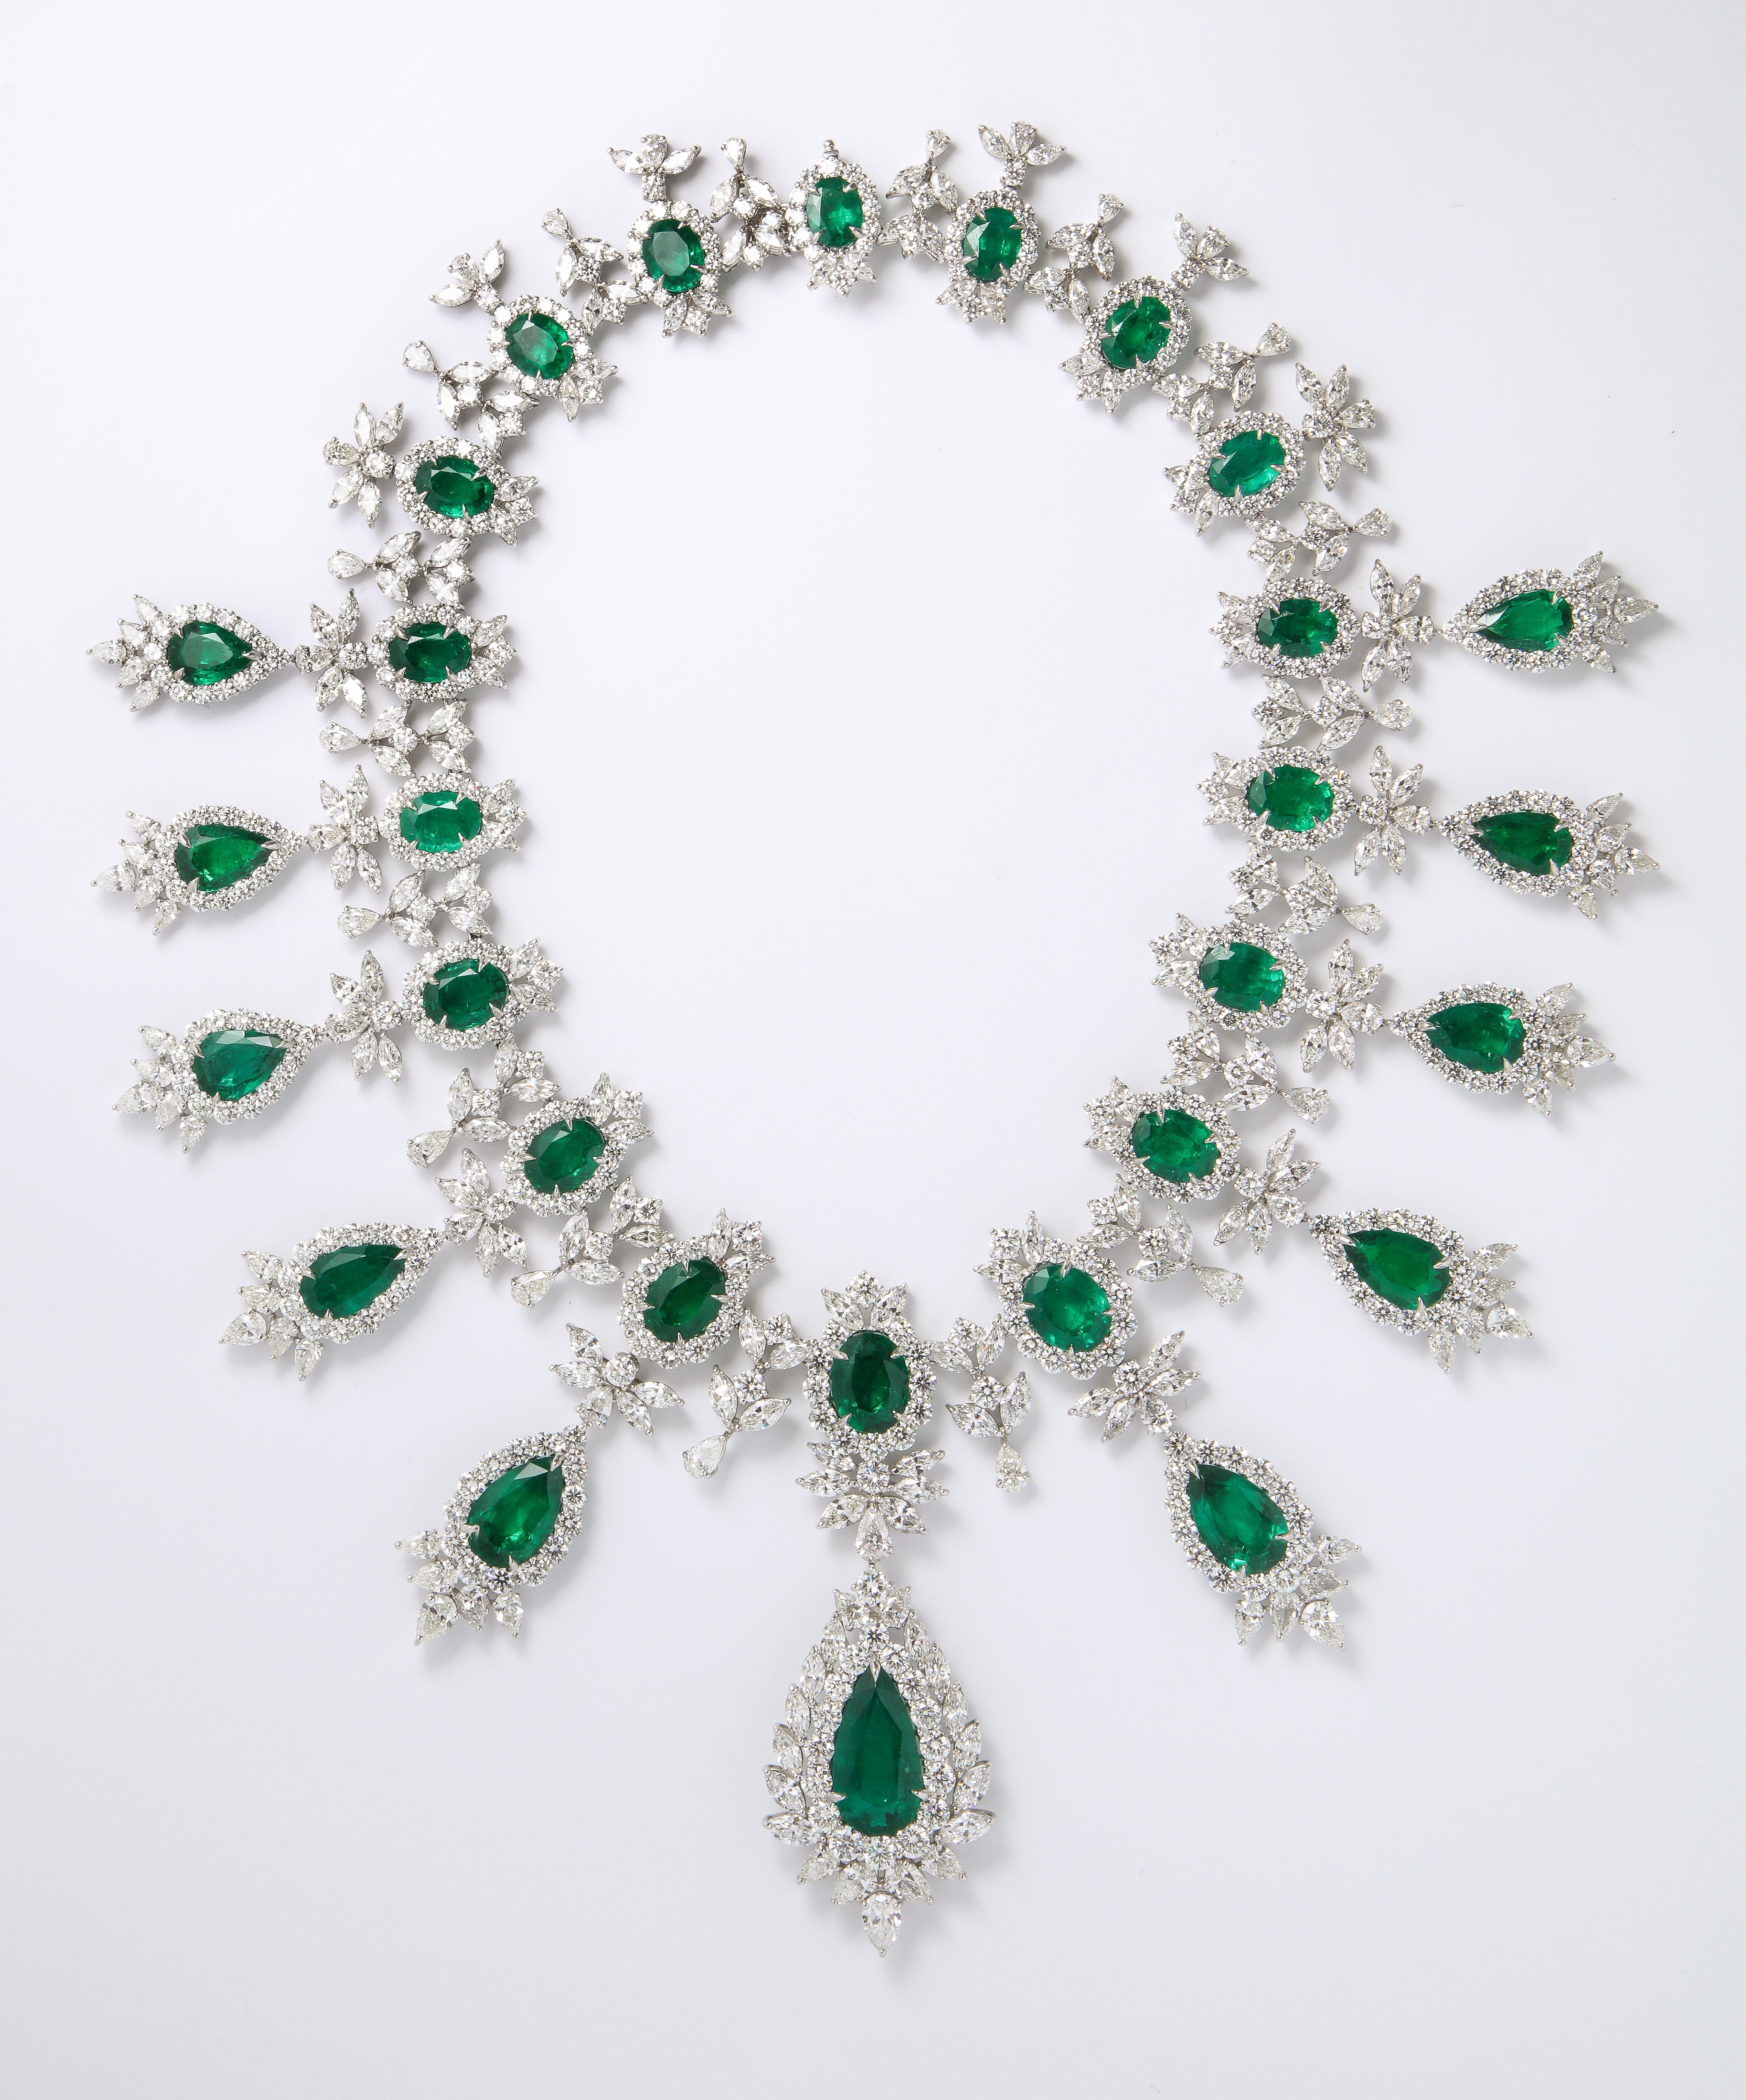 
A MAGNIFICENT PIECE!

An important emerald and diamond necklace. 

144.07 carats of fine quality, 